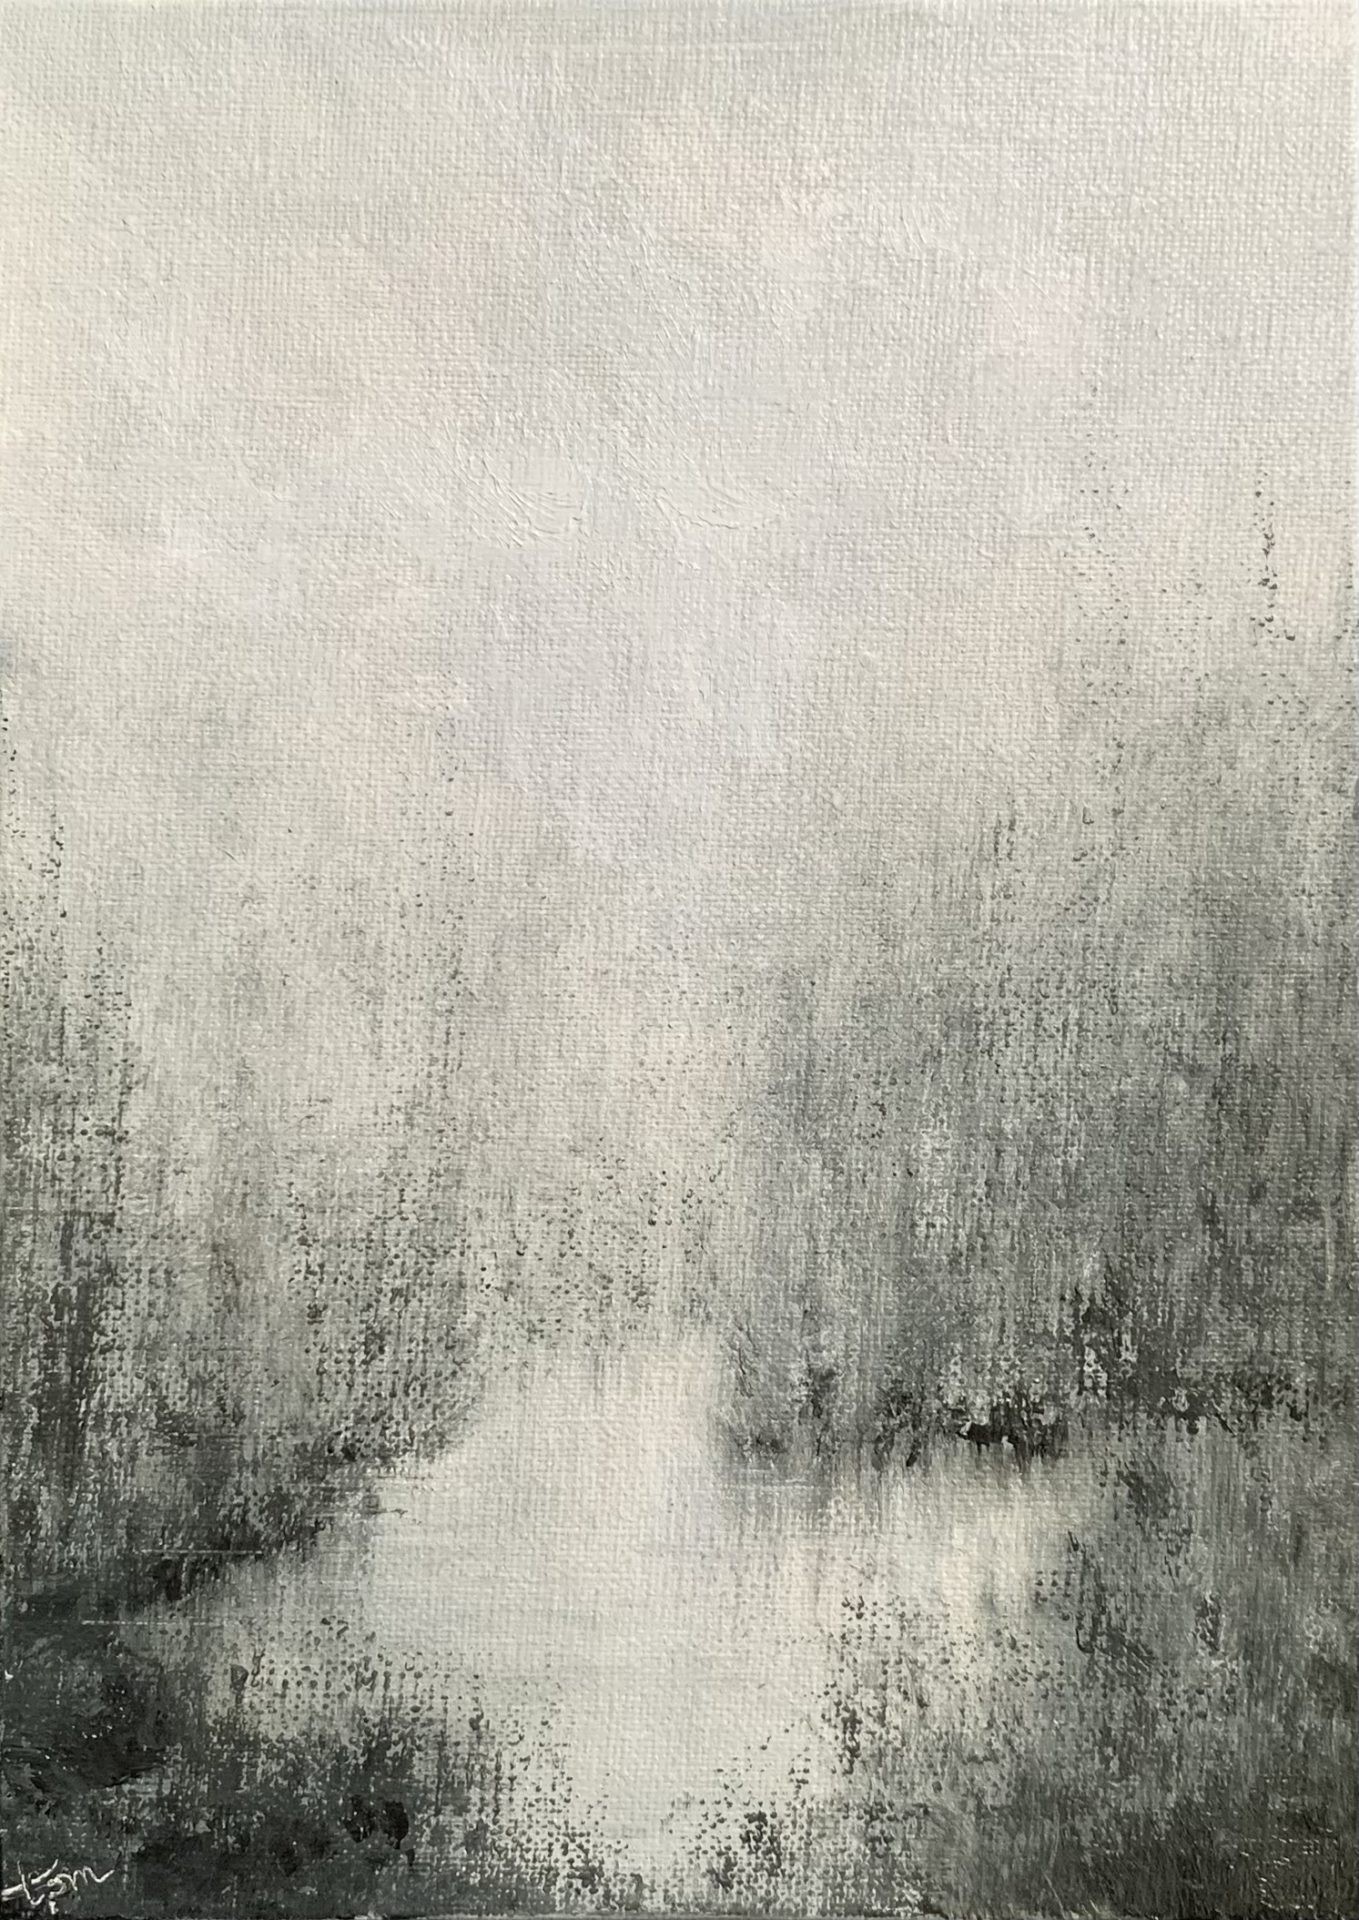 Original landscape oil painting by Tisha Mark, Week 24, 52 Weeks of Finding Light), 7”x5” oil on linen panel (2023). Vertically oriented landscape painting in a limited palette of soft cool gray tones featuring an atmospheric foggy scene of trees surrounding a body of water that fades into the distance.